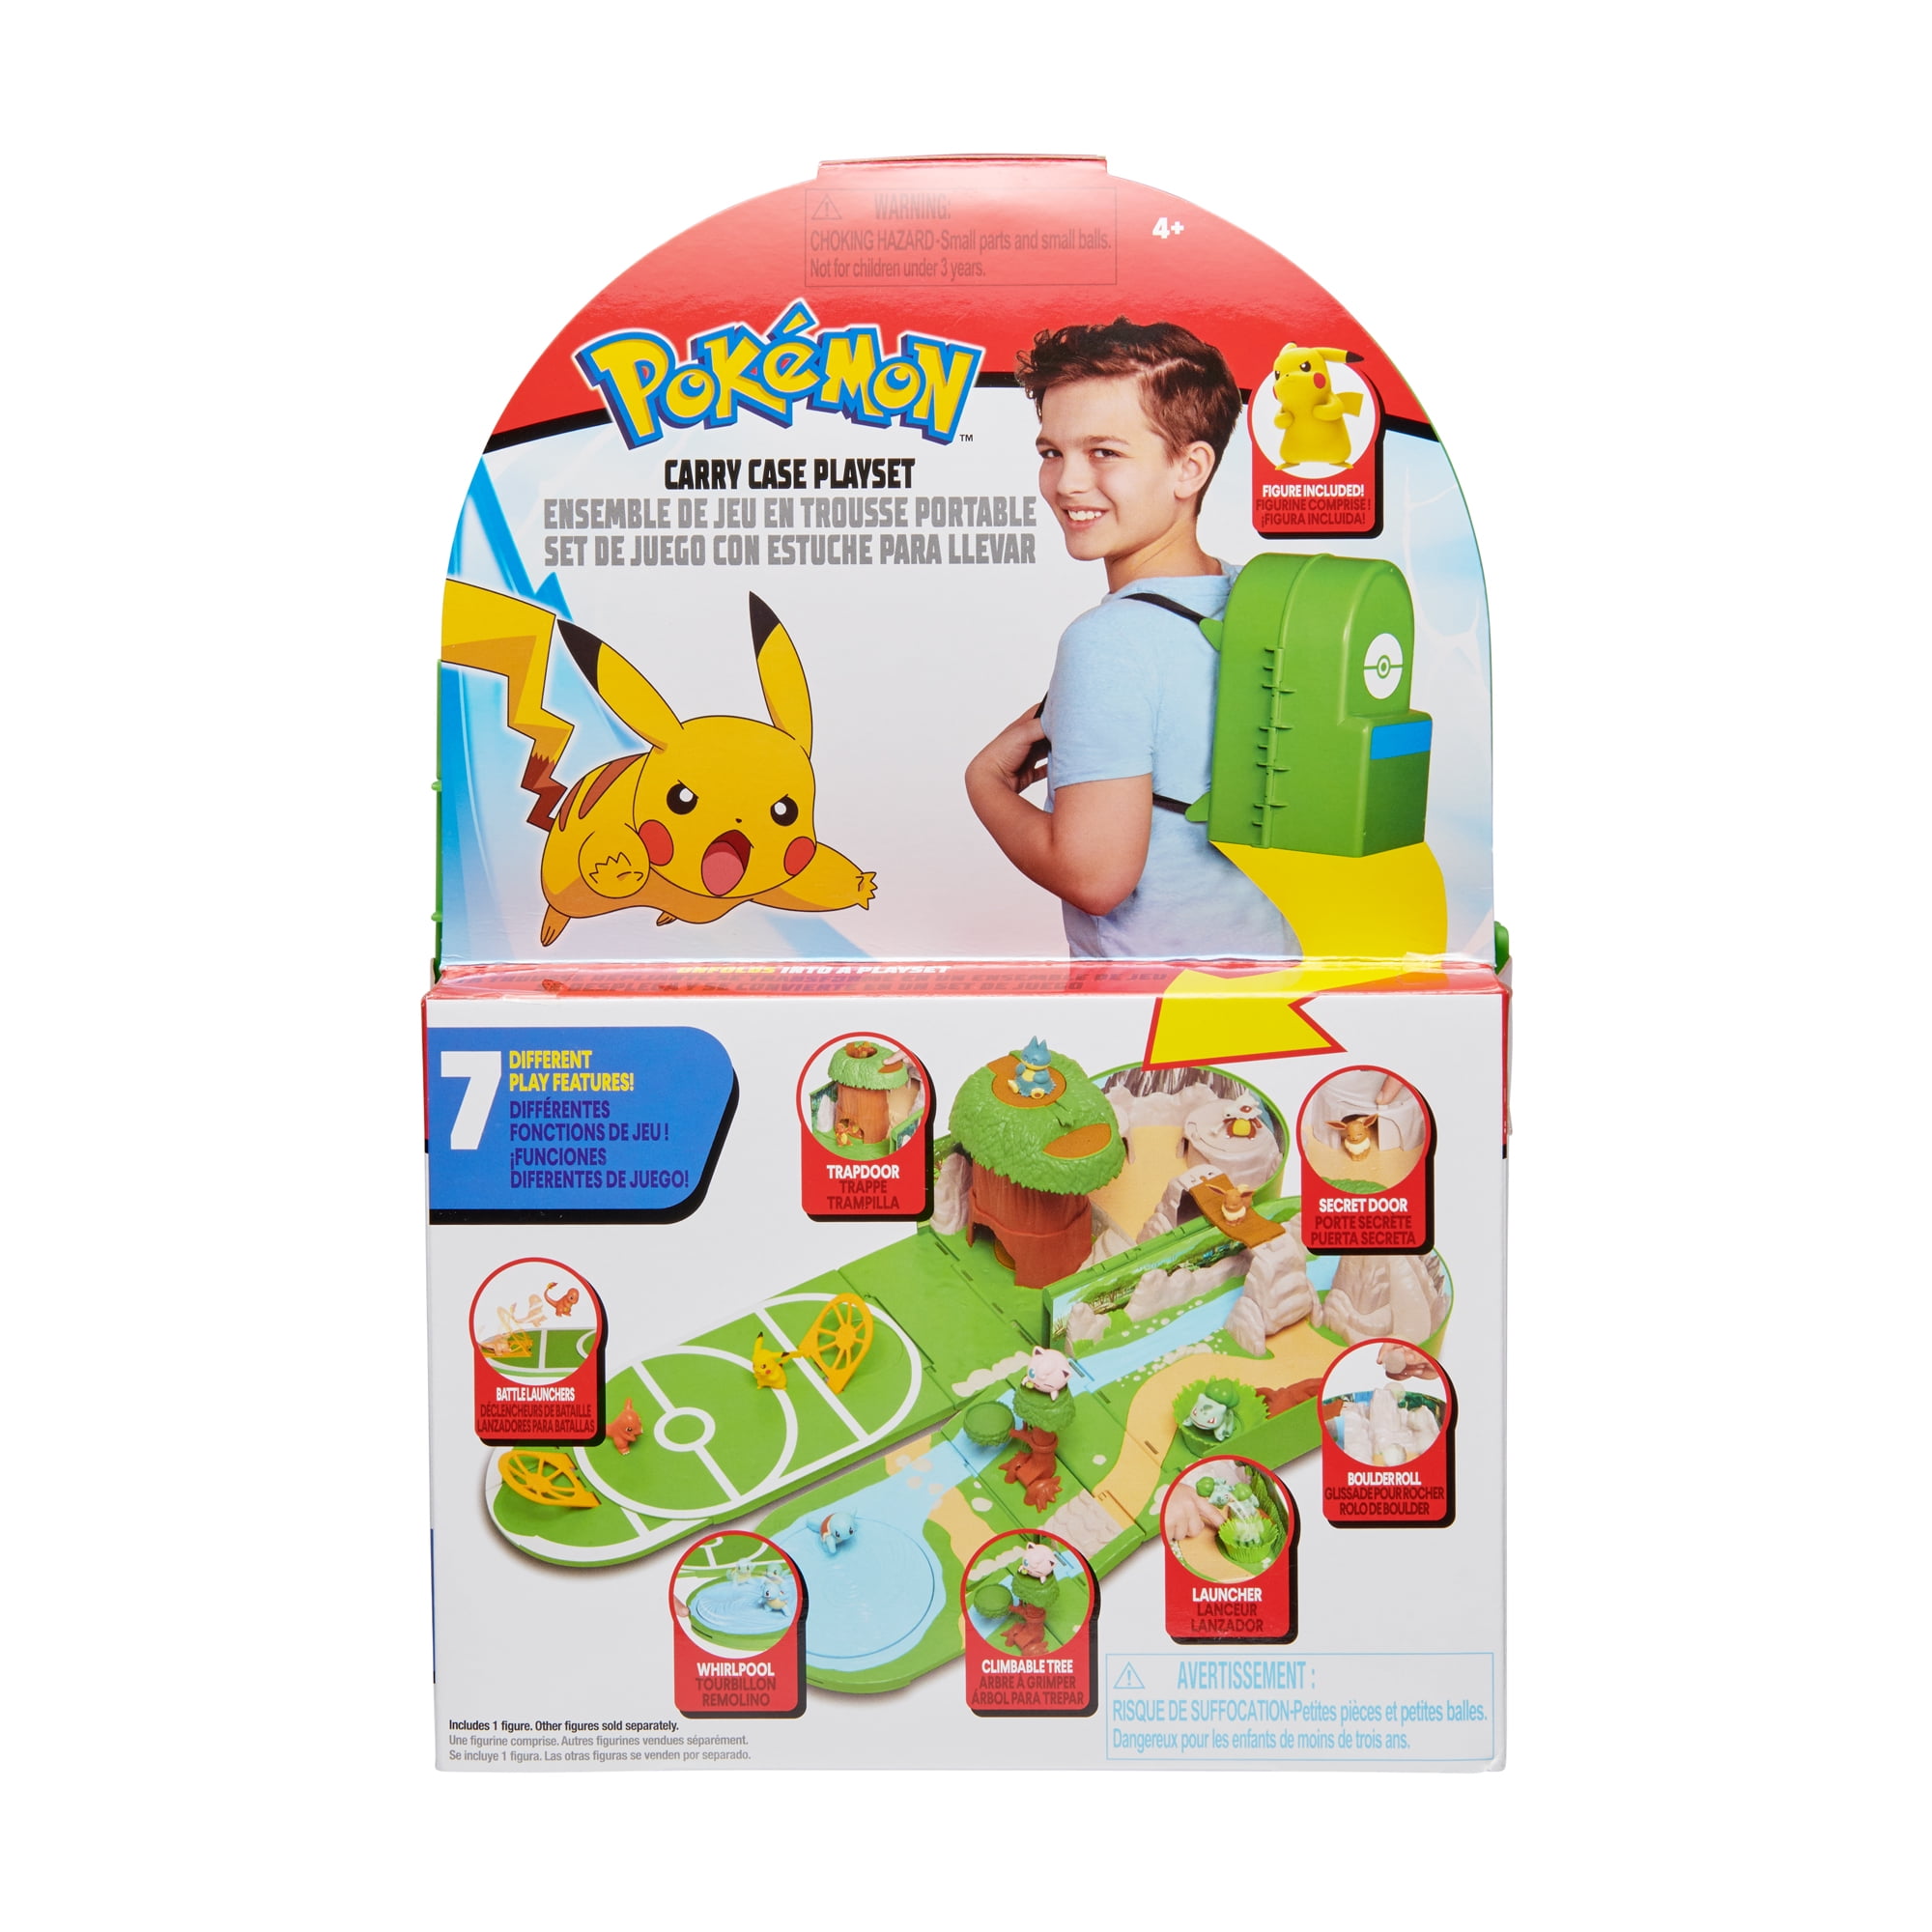 Details about   2020 Pokemon Carrying Case Medium Playset Portable Backpack & 2" Pikachu Figure 